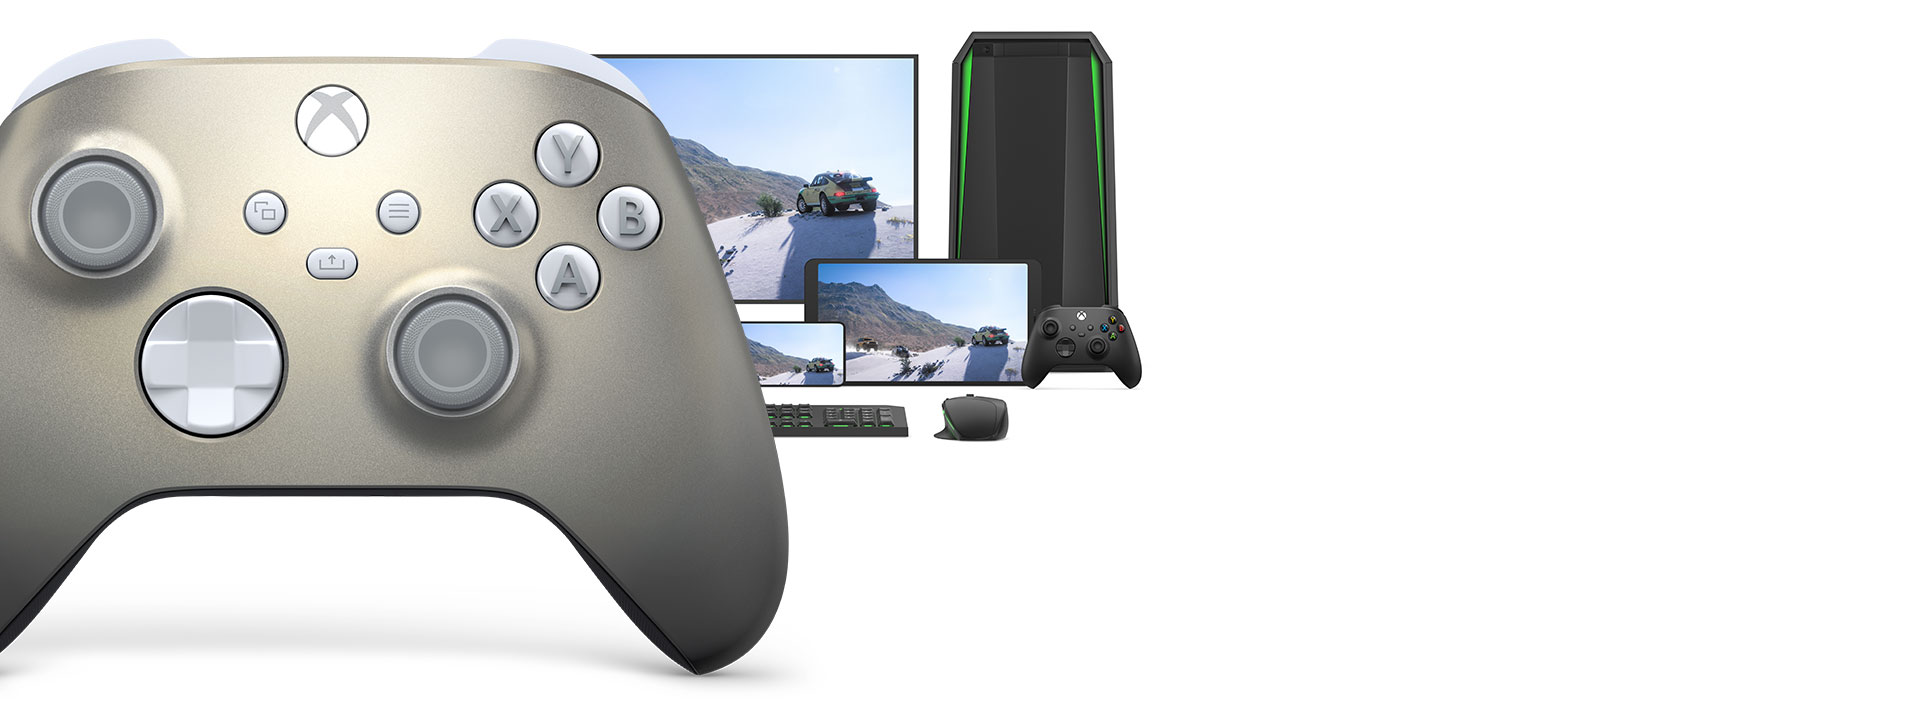 Xbox Wireless Controller - Lunar Shift Special Edition with a computer, TV, and an Xbox Series S